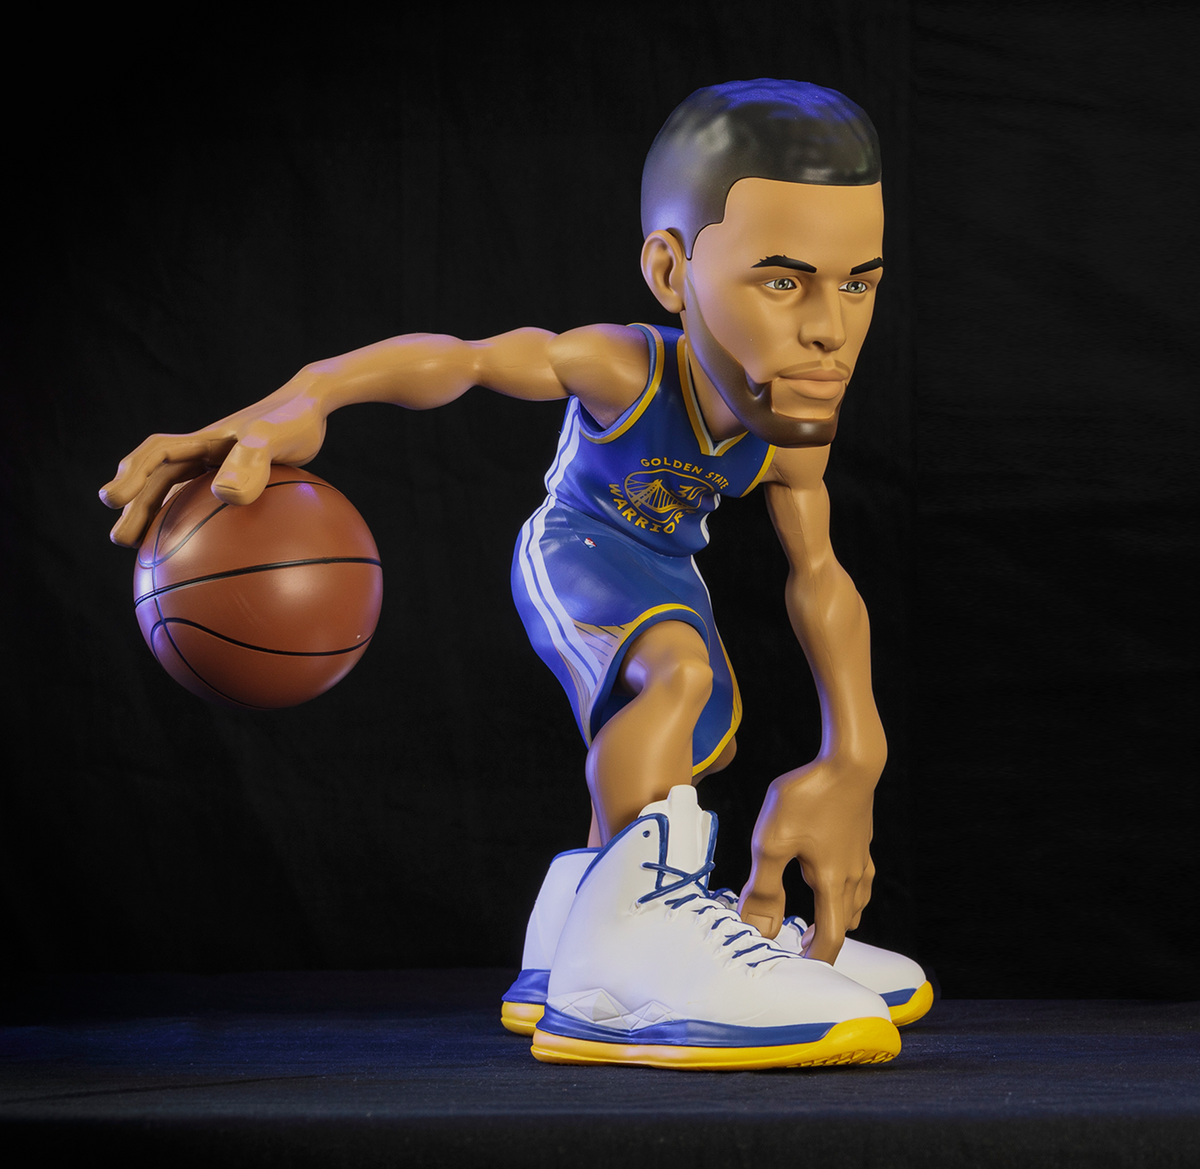 Stephen Curry Collectibles: Limited Edition Warriors' smALL-STARS – www.